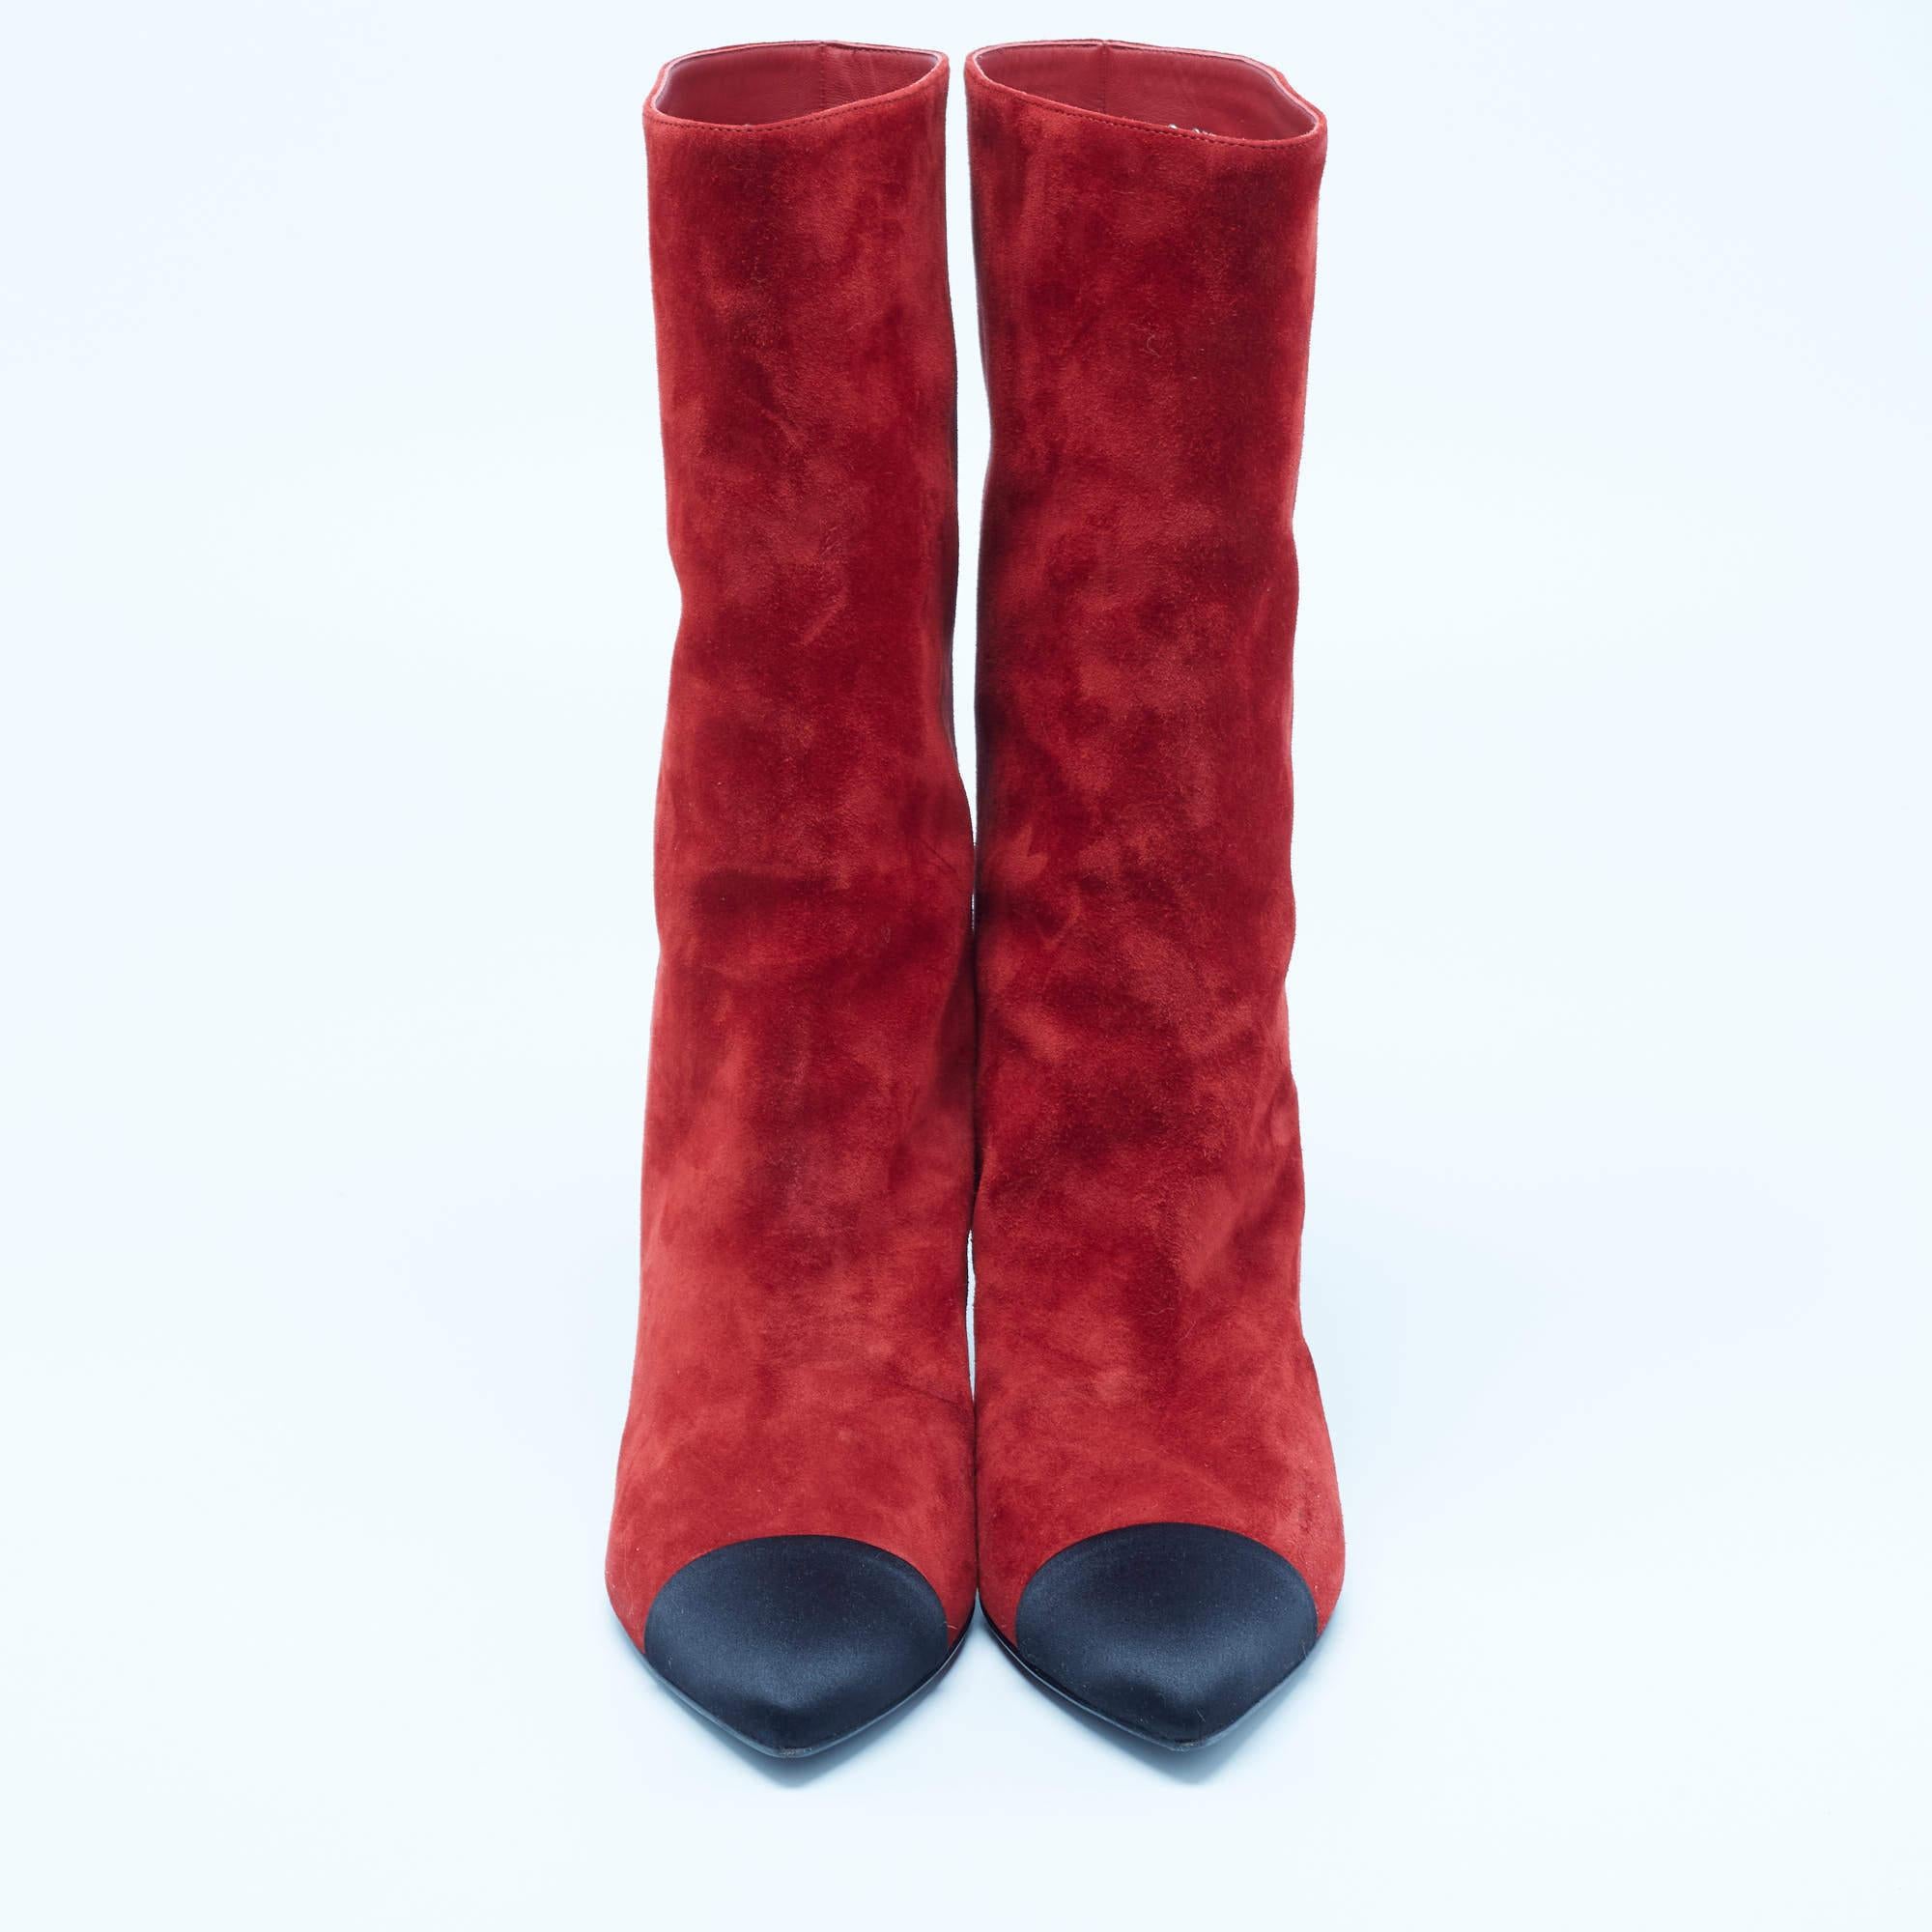 Chanel Red/Black Suede Pointed Toe Mid Calf Boots Size 40 5